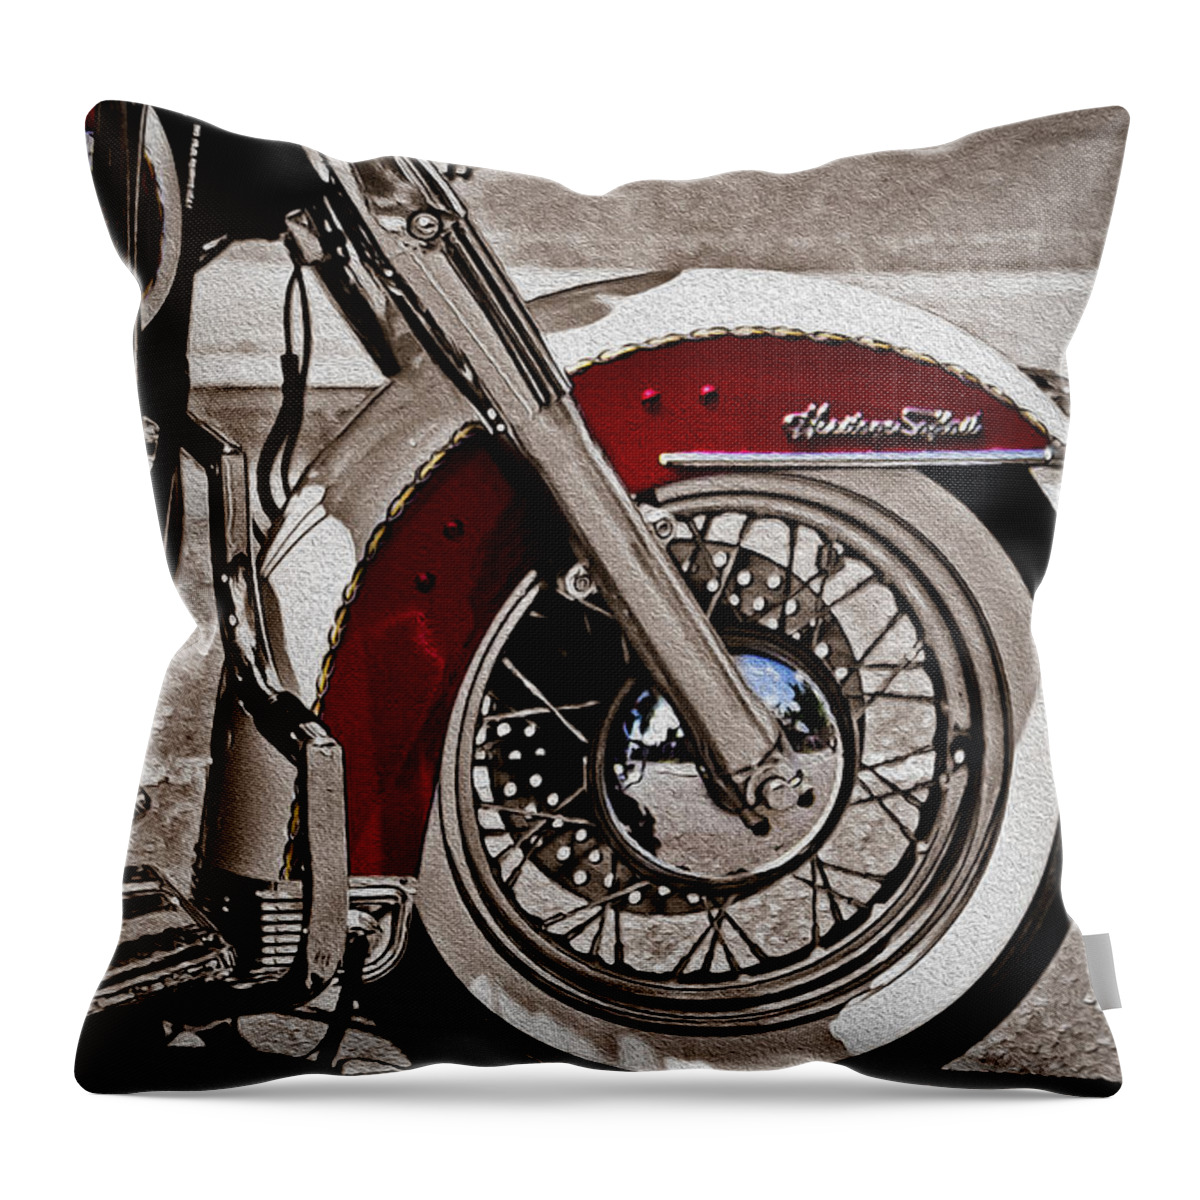 Vintage Throw Pillow featuring the photograph Reflections on a Motorcycle by Tom Gari Gallery-Three-Photography